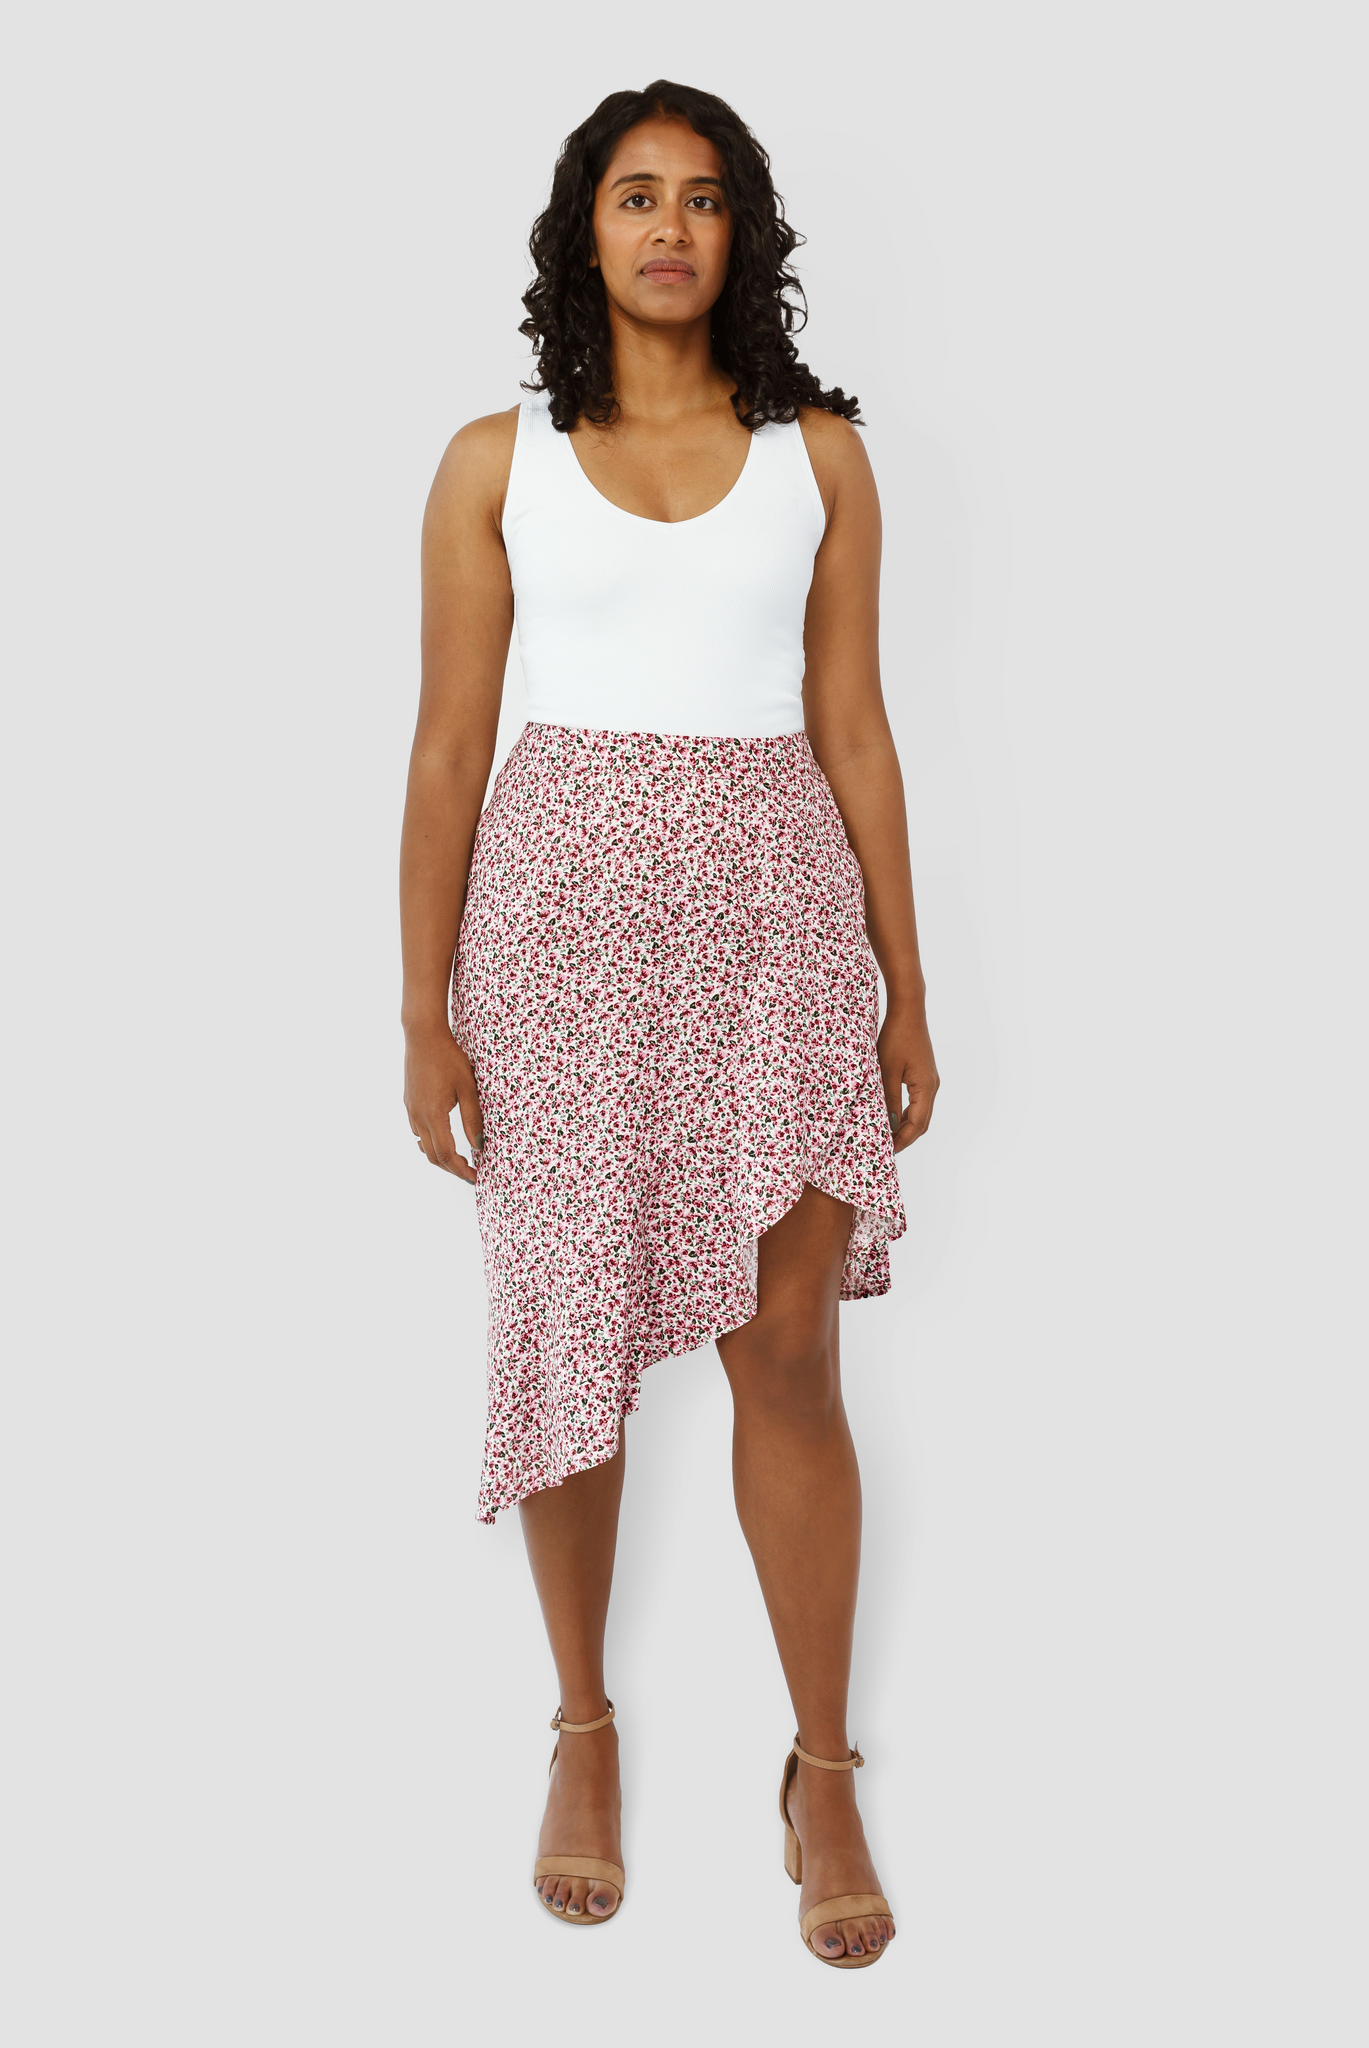 The Cascade Skirt by Aam is a universally flattering midi skirt. It sits high at the waist with more room for full hips and thighs. Shown here is the front view on a model who is 5'7" with 2" heels. She is wearing a size Small.